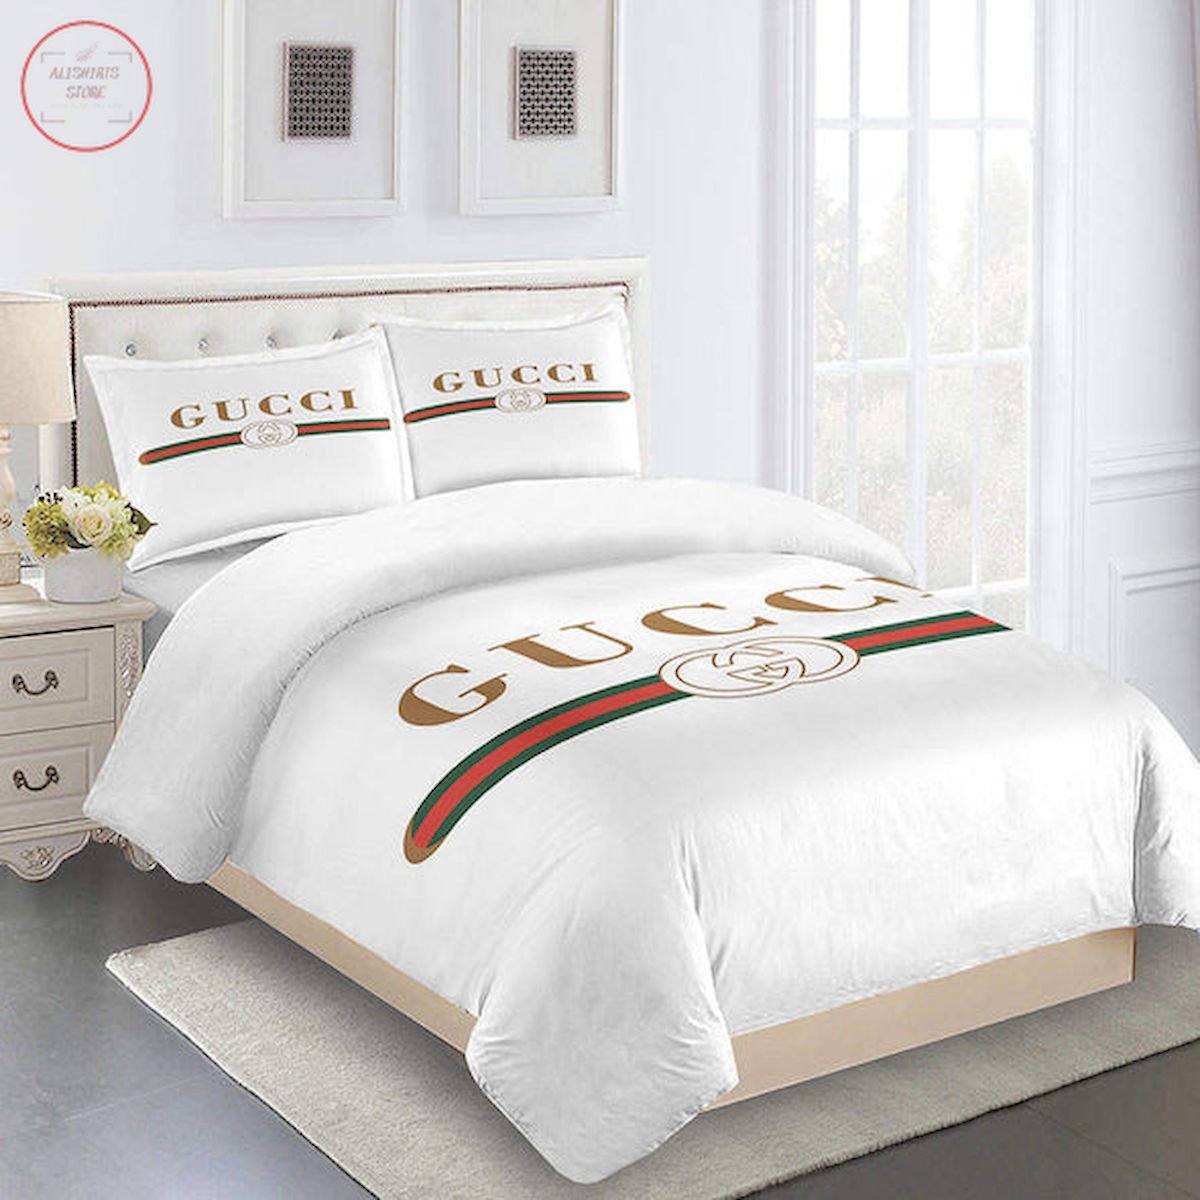 Gucci bedding set white Luxury bed sheets